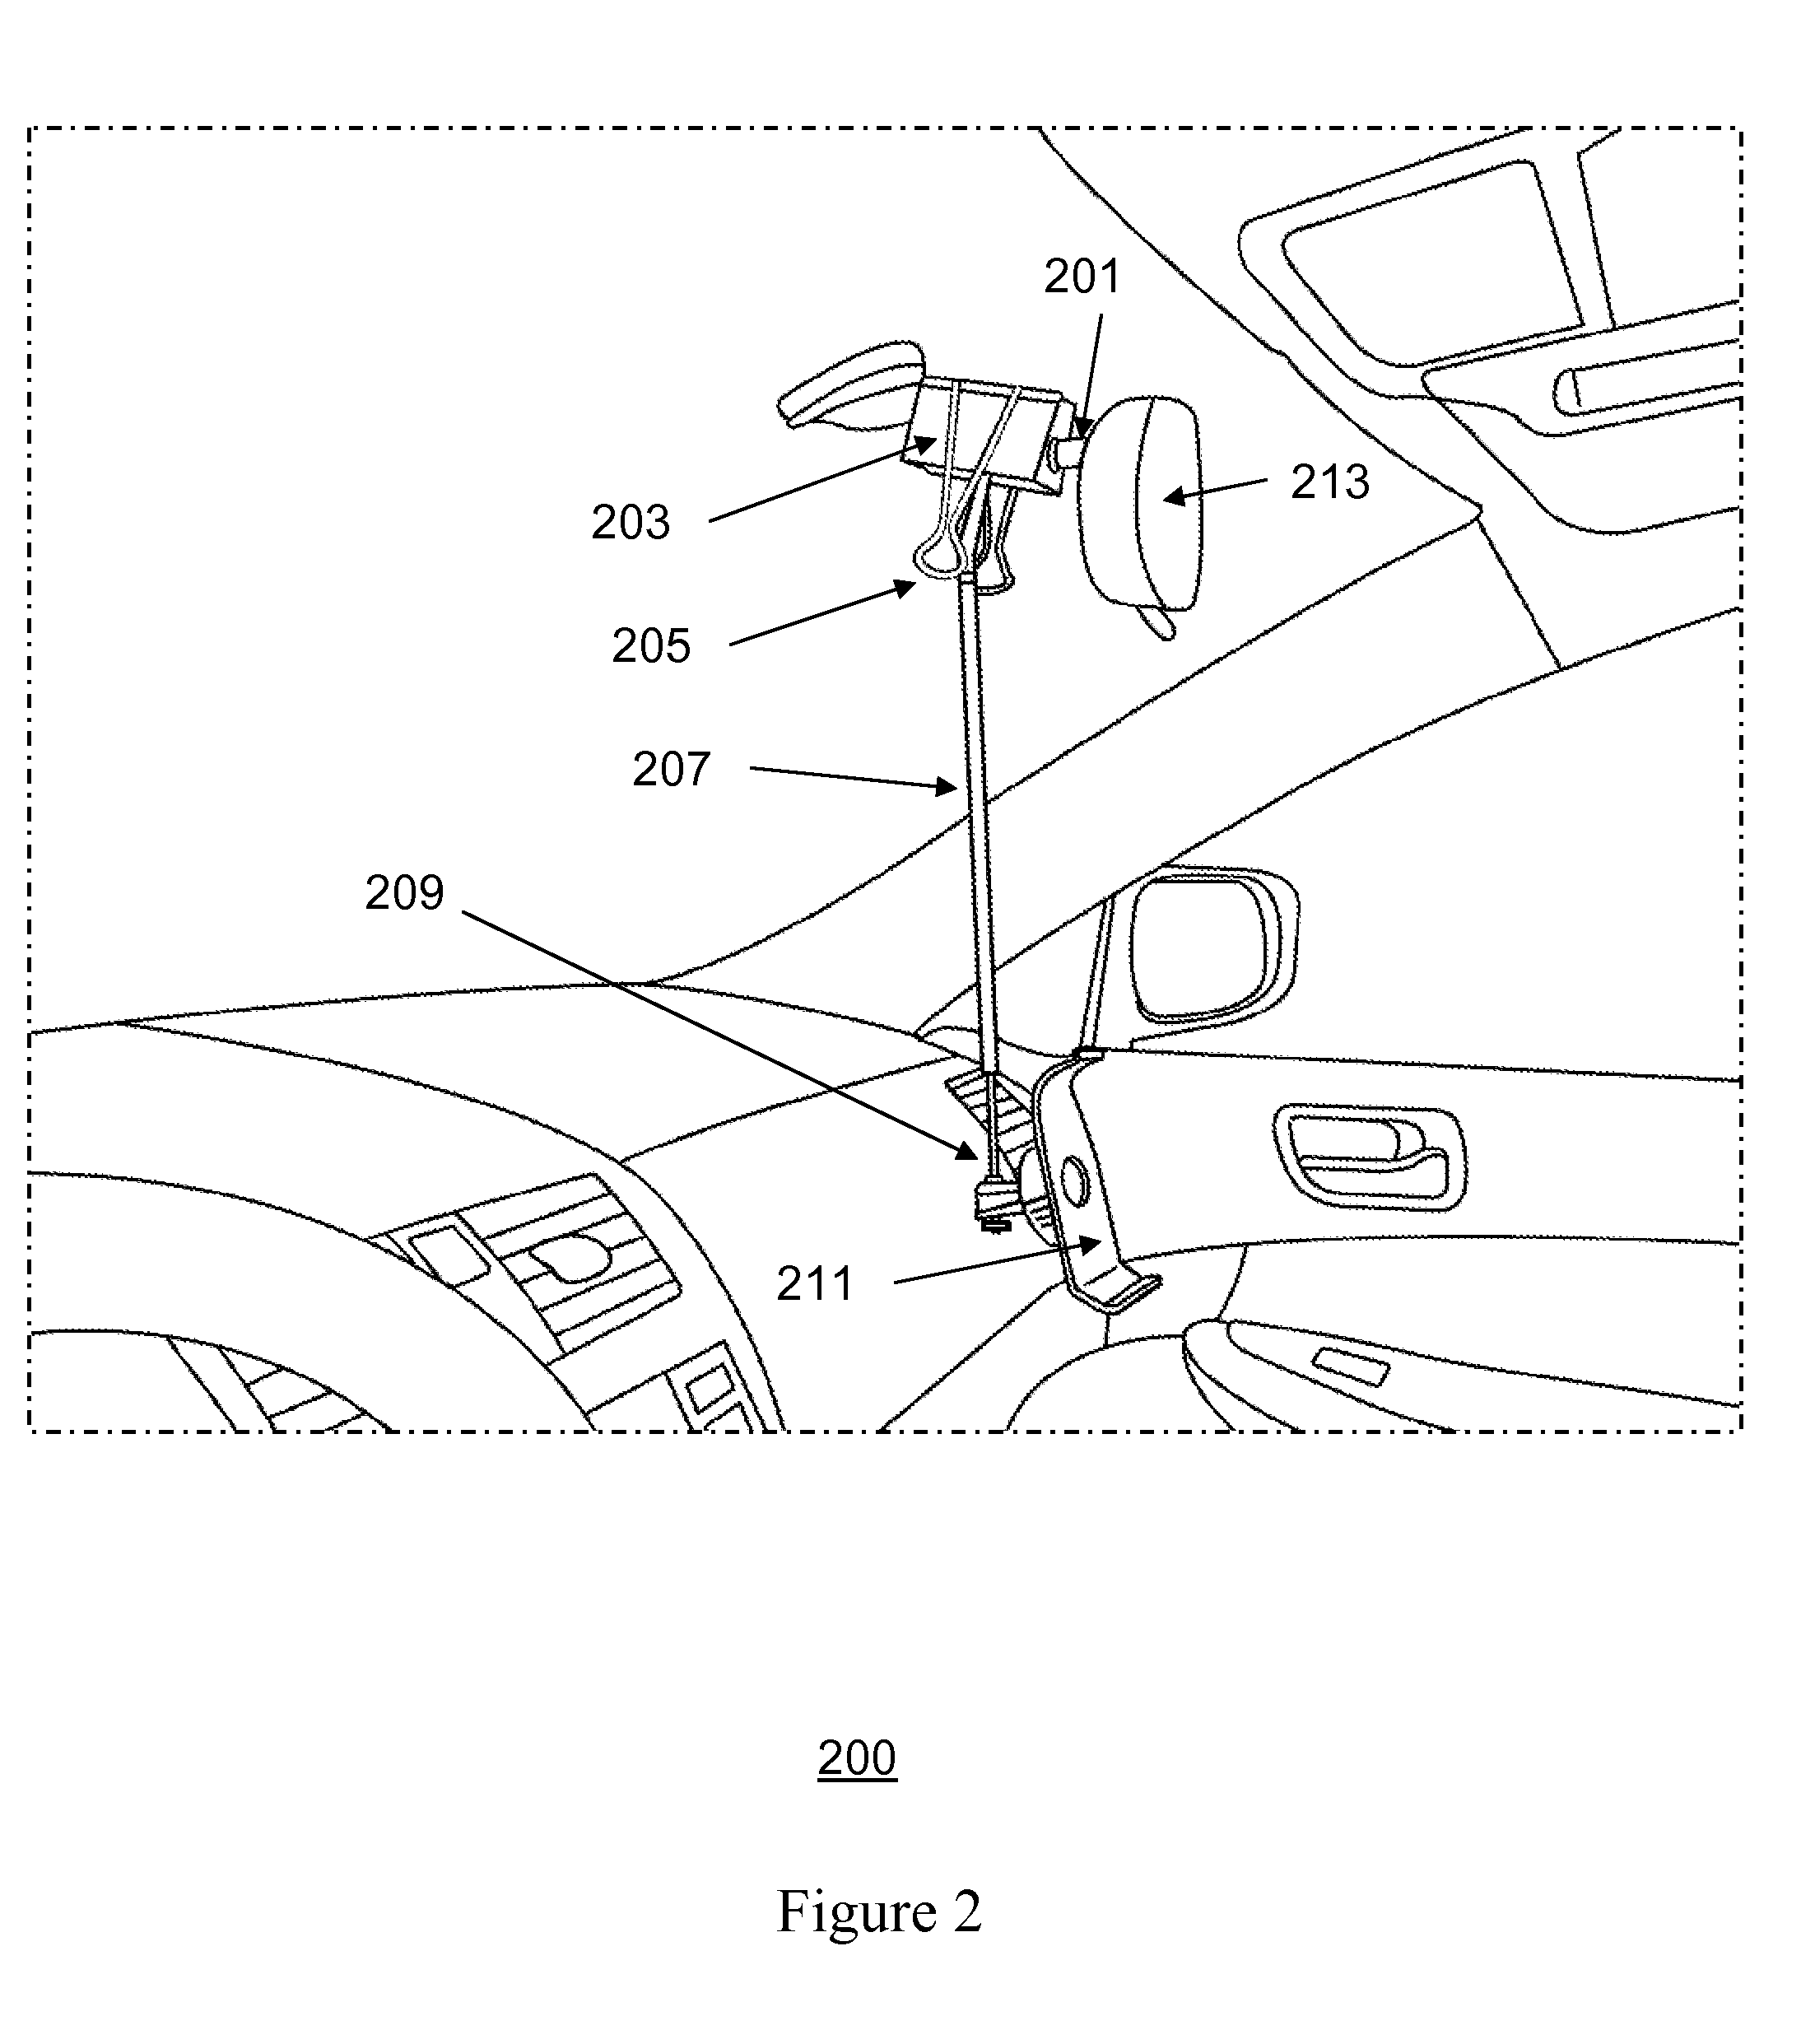 Apparatus and method for holding a portable electronic device